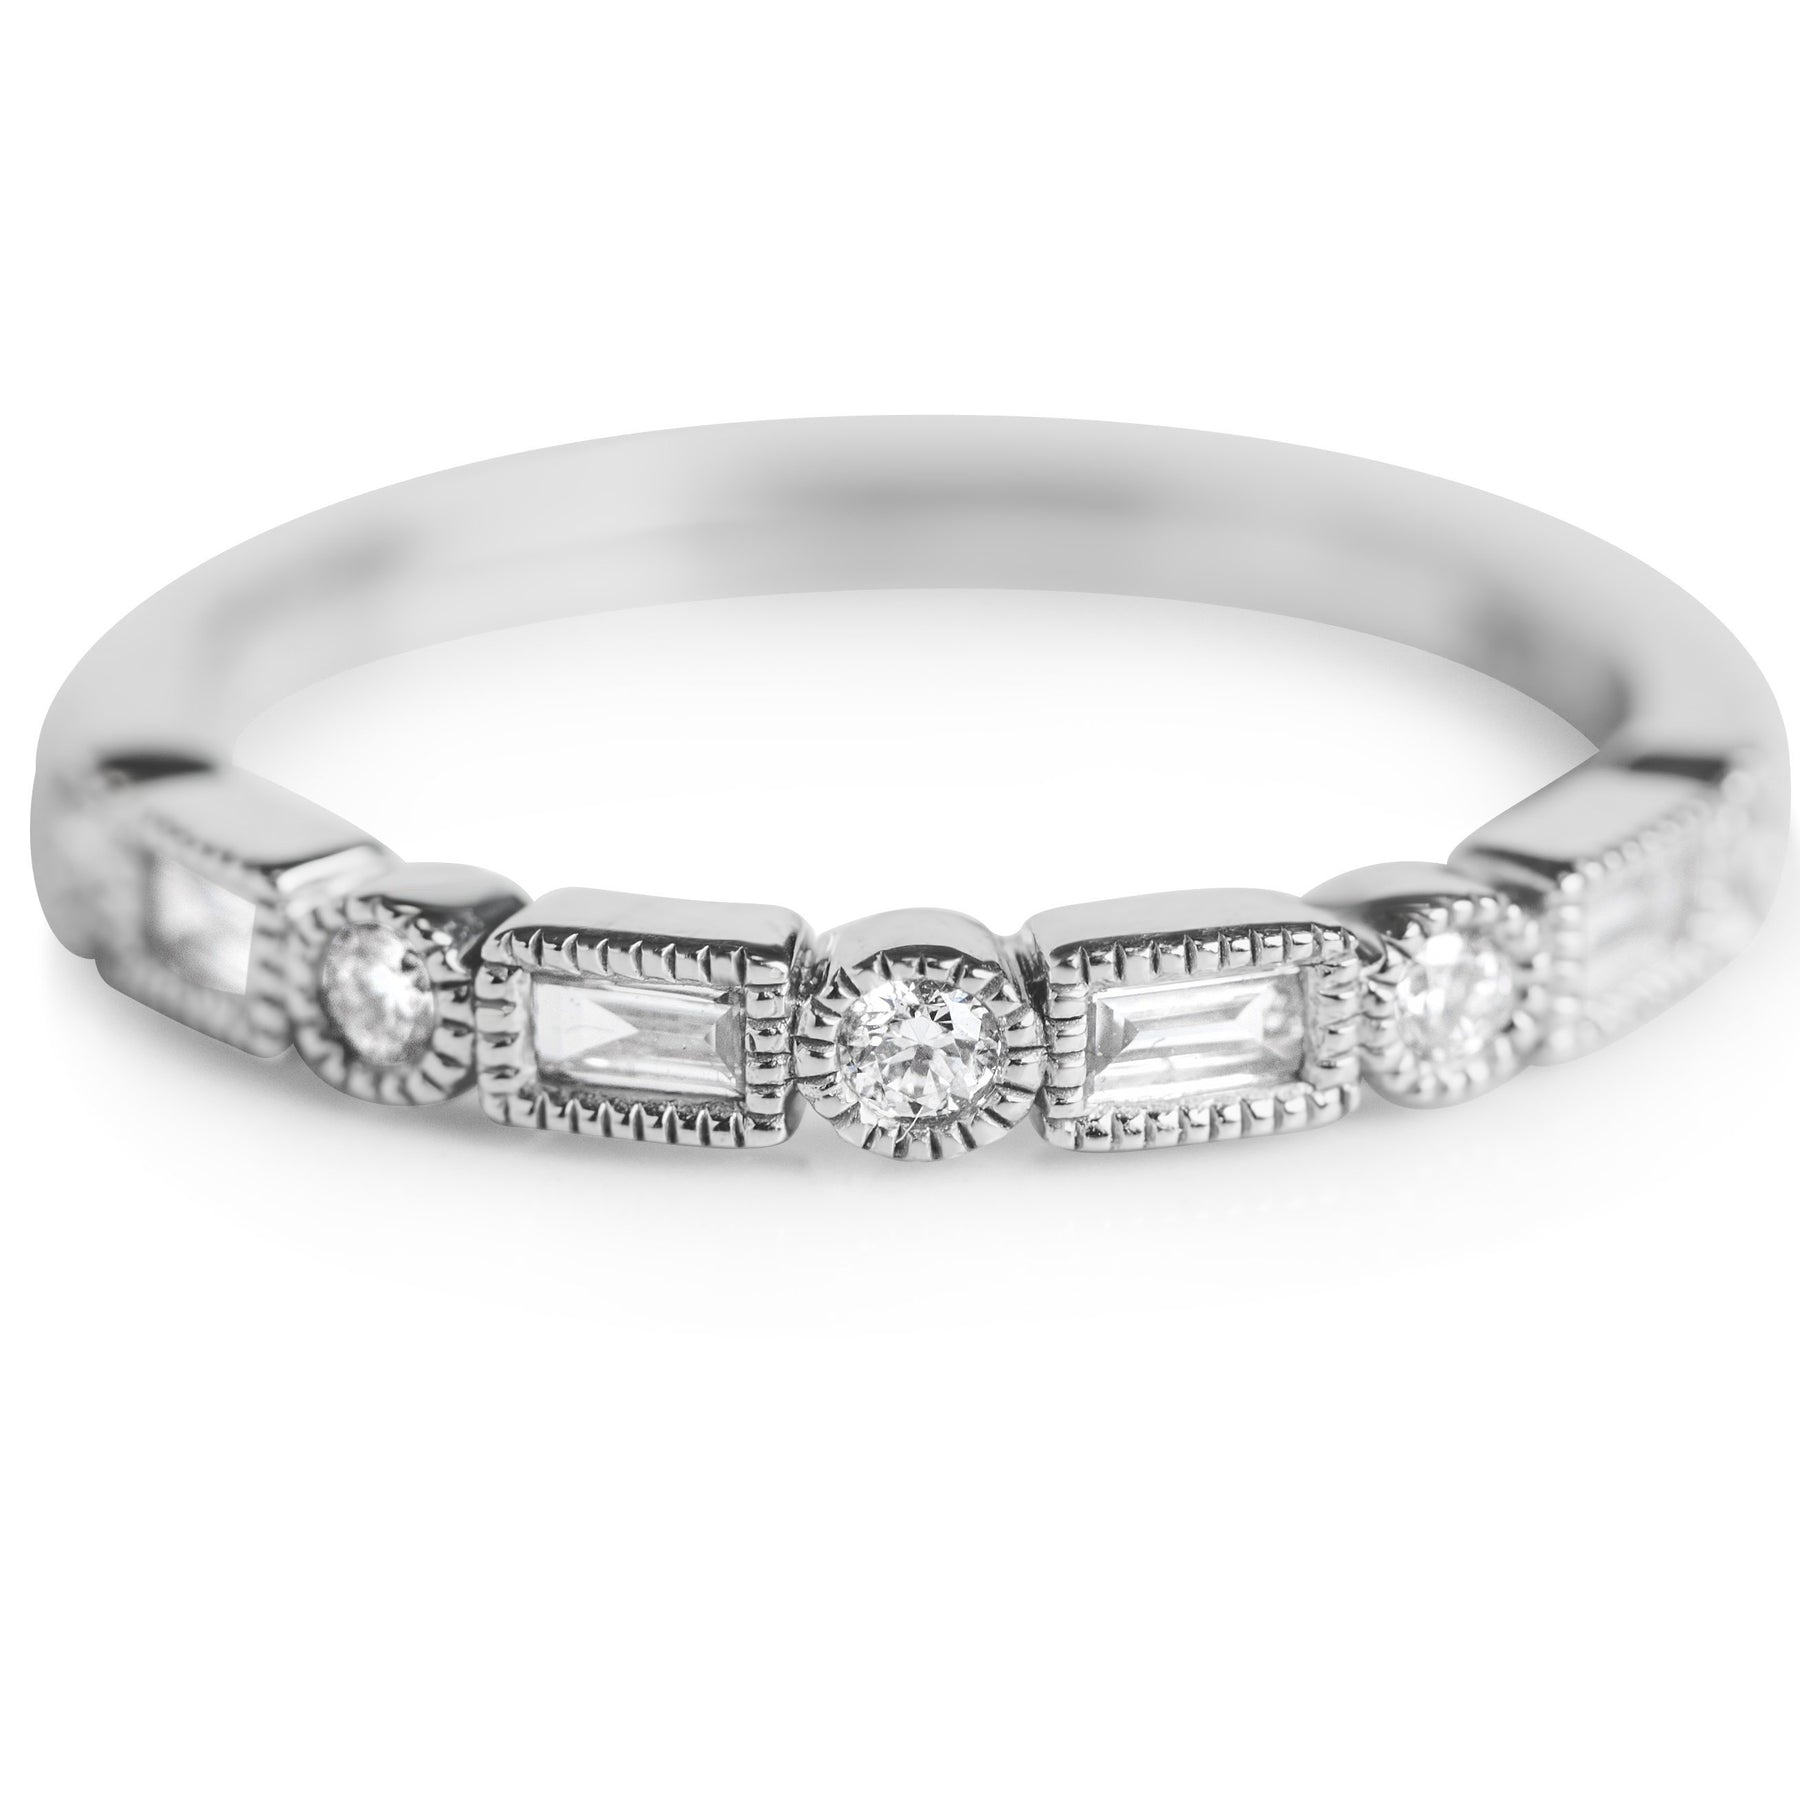 white gold and diamond Art Deco inspired stack ring or wedding band